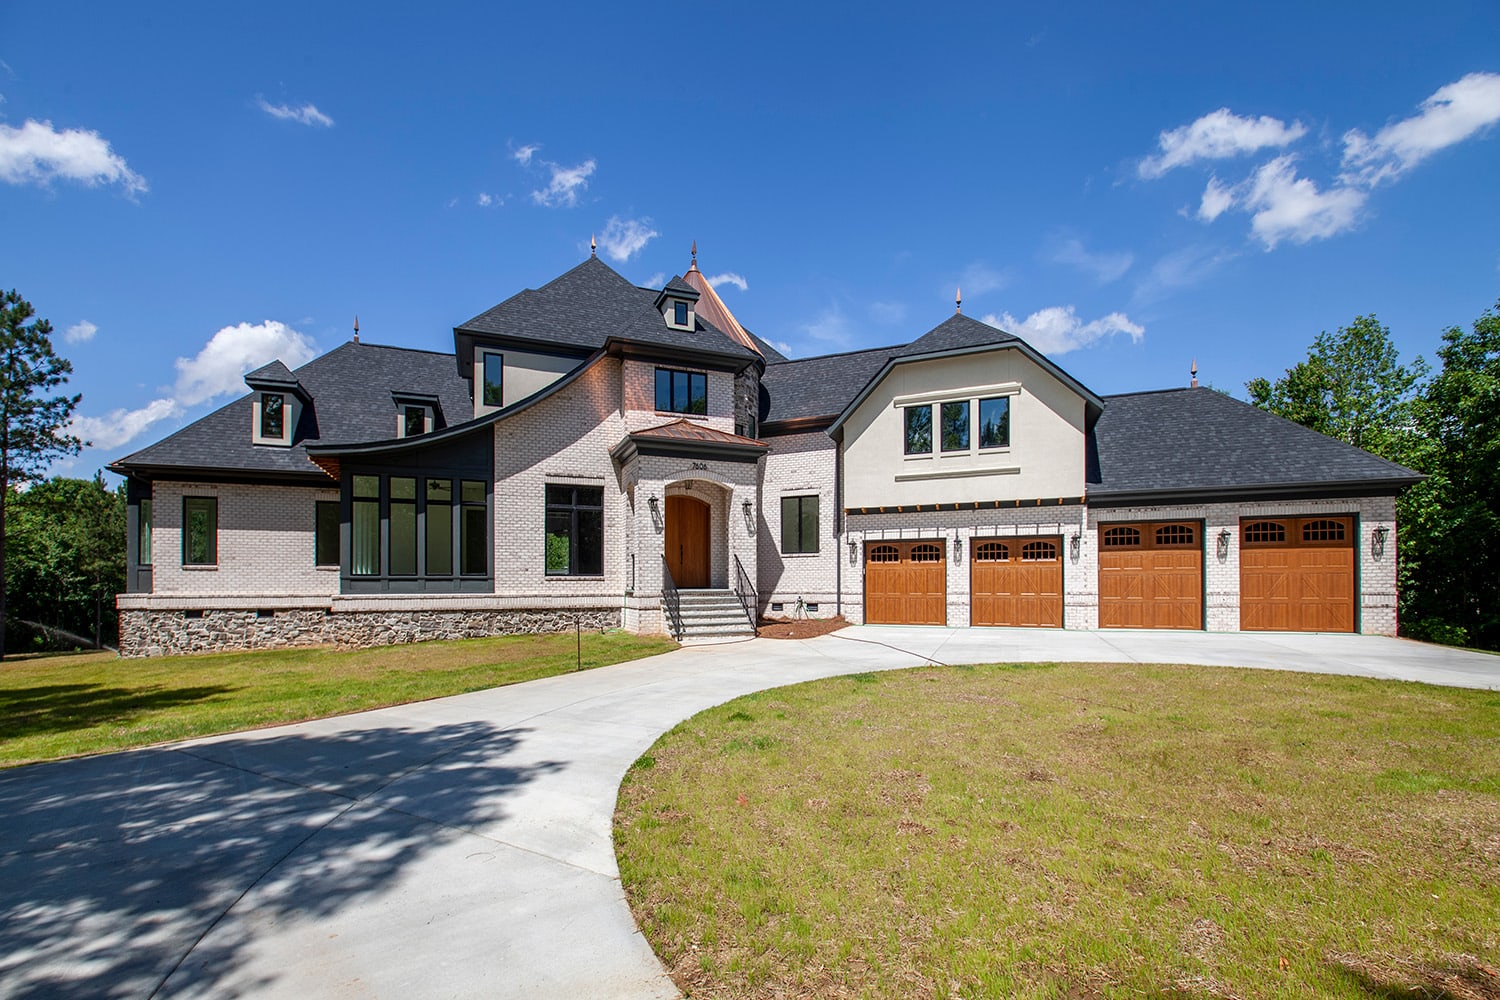 Custom home exterior in Charlotte, NC with four car garage